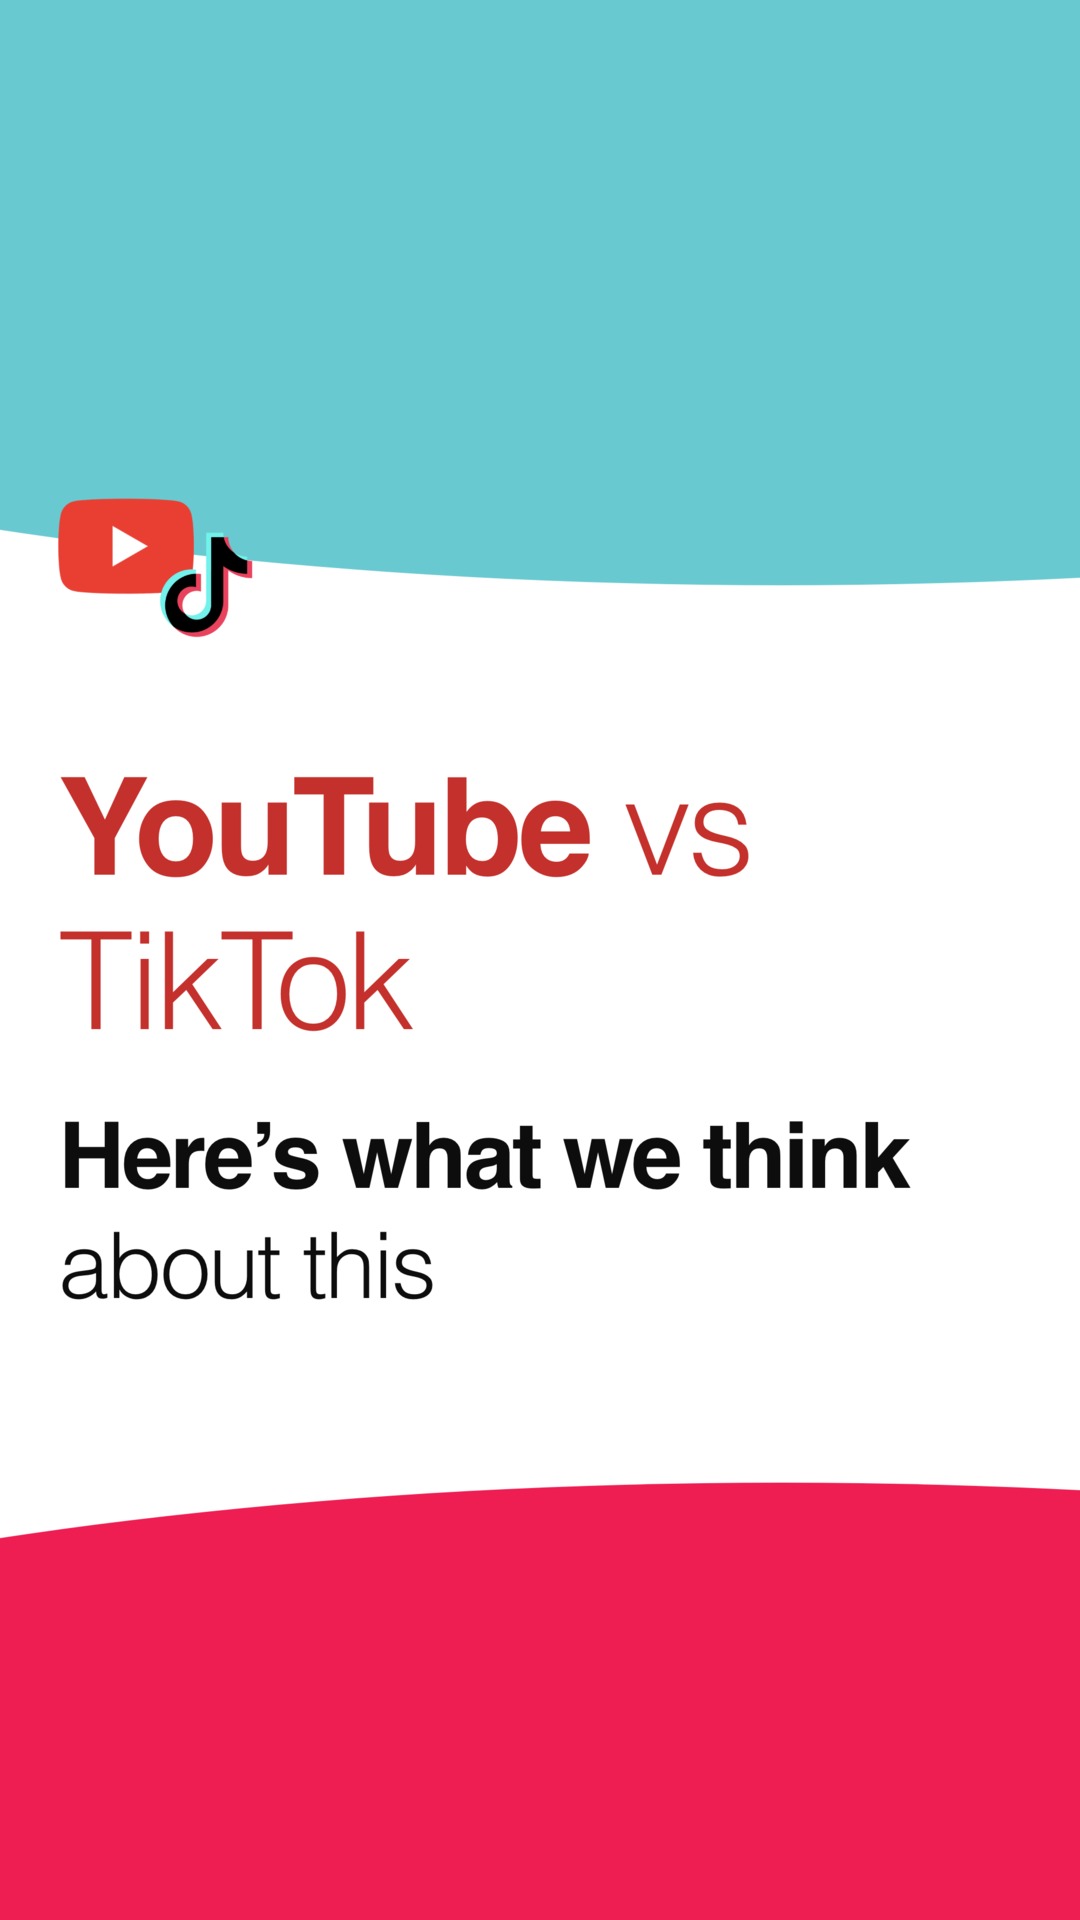 YouTube vs TikTok - Here’s what we think about this image